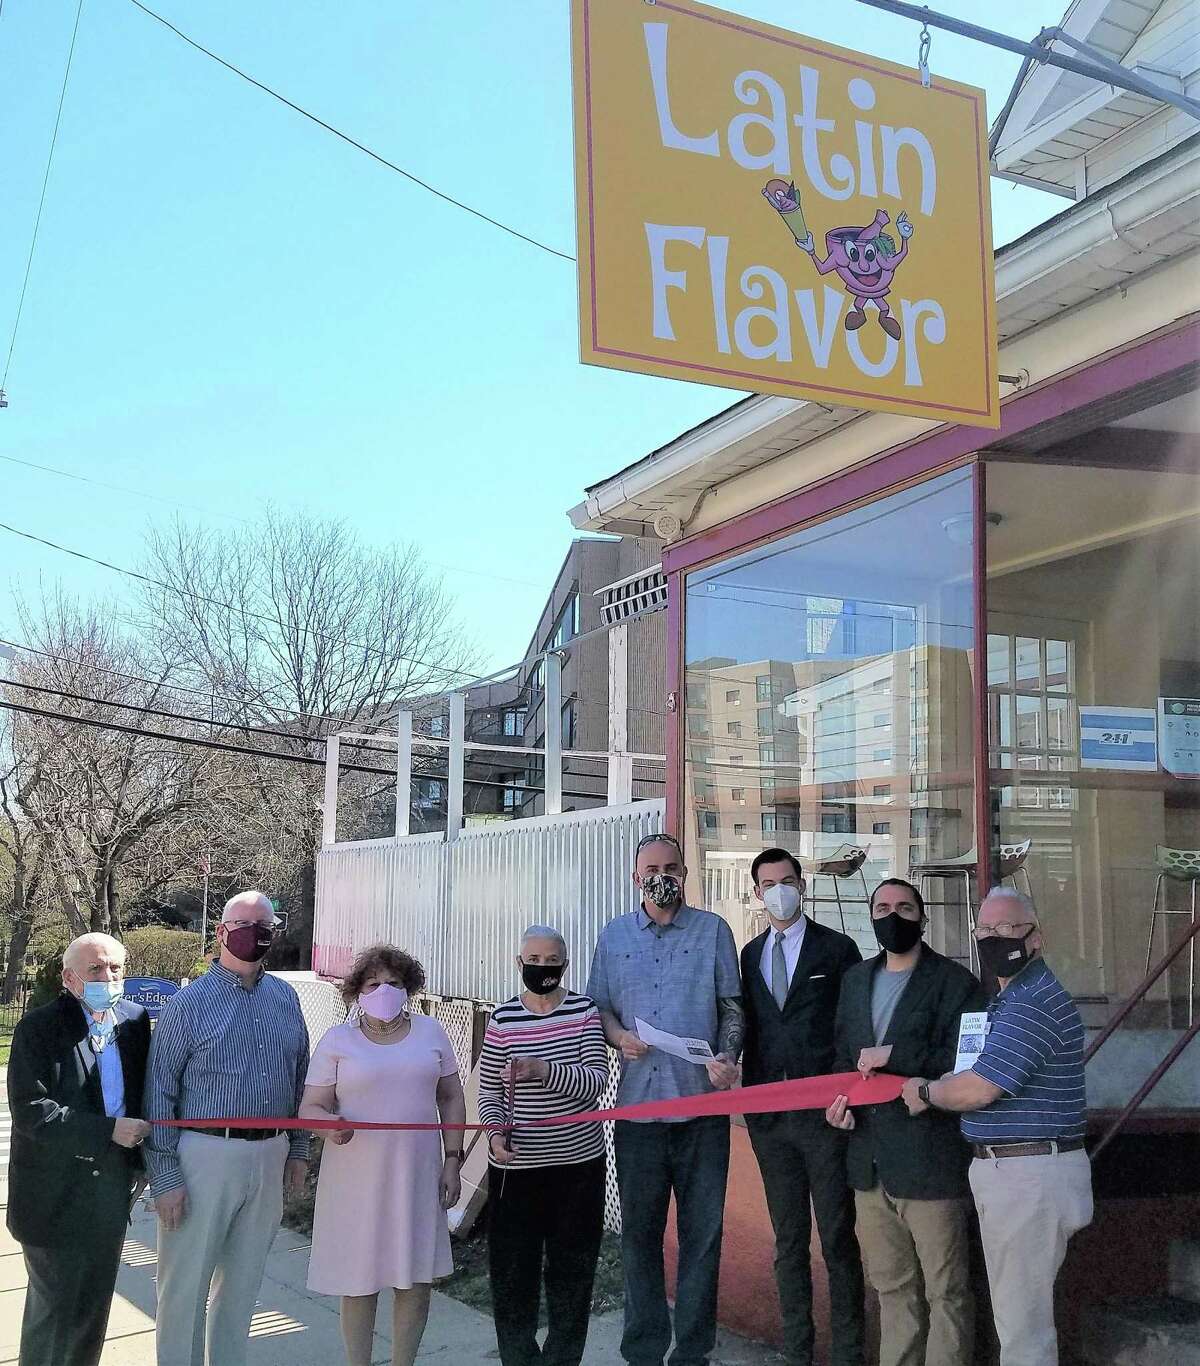 Latin Flavor in Middletown held a grand opening April 8. From left are Middlesex County Chamber of Commerce President Larry McHugh, Chairman Tom Byrne, Central Business Bureau Chairwoman Pamela Steele, chef Lydia Perez, owner Edwin Maldonado, Mayor Ben Florsheim, state Rep. Brandon Chafee and chamber ambassador and Common Council Minority Leader Phil Pessina.